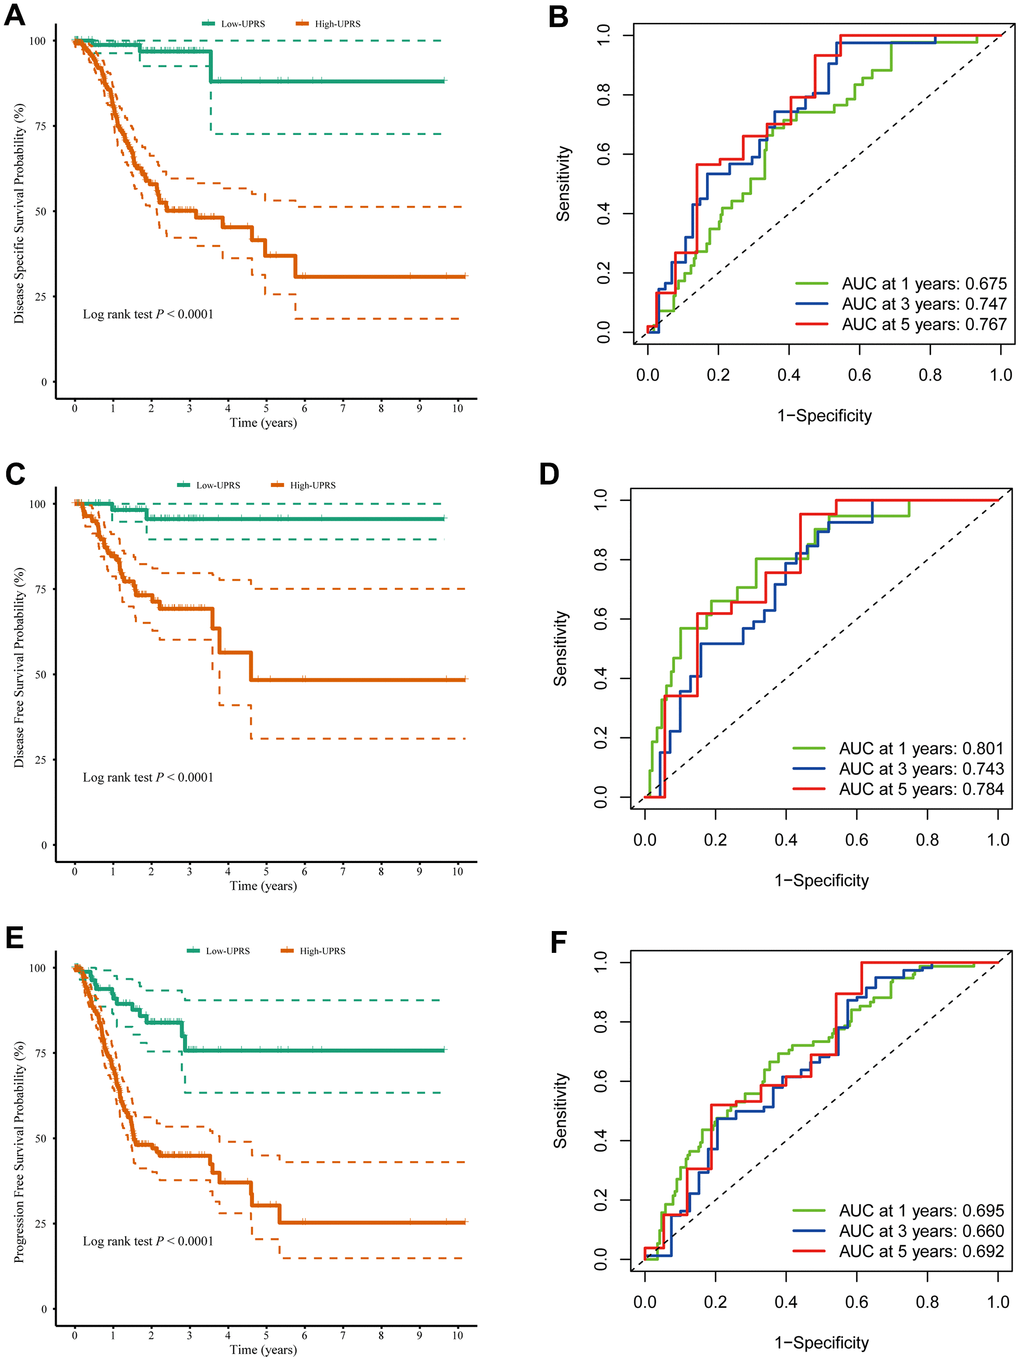 The UPR-related predictive signature for stomach cancer patients. (A) Disease-specific survival among different groups and (B) the ROC for disease-specific survival prediction. (C) Disease-free survival among different groups and (D) the ROC for disease-free survival prediction. (E) Progression-free survival among different groups and (F) the ROC for progression-free survival prediction.